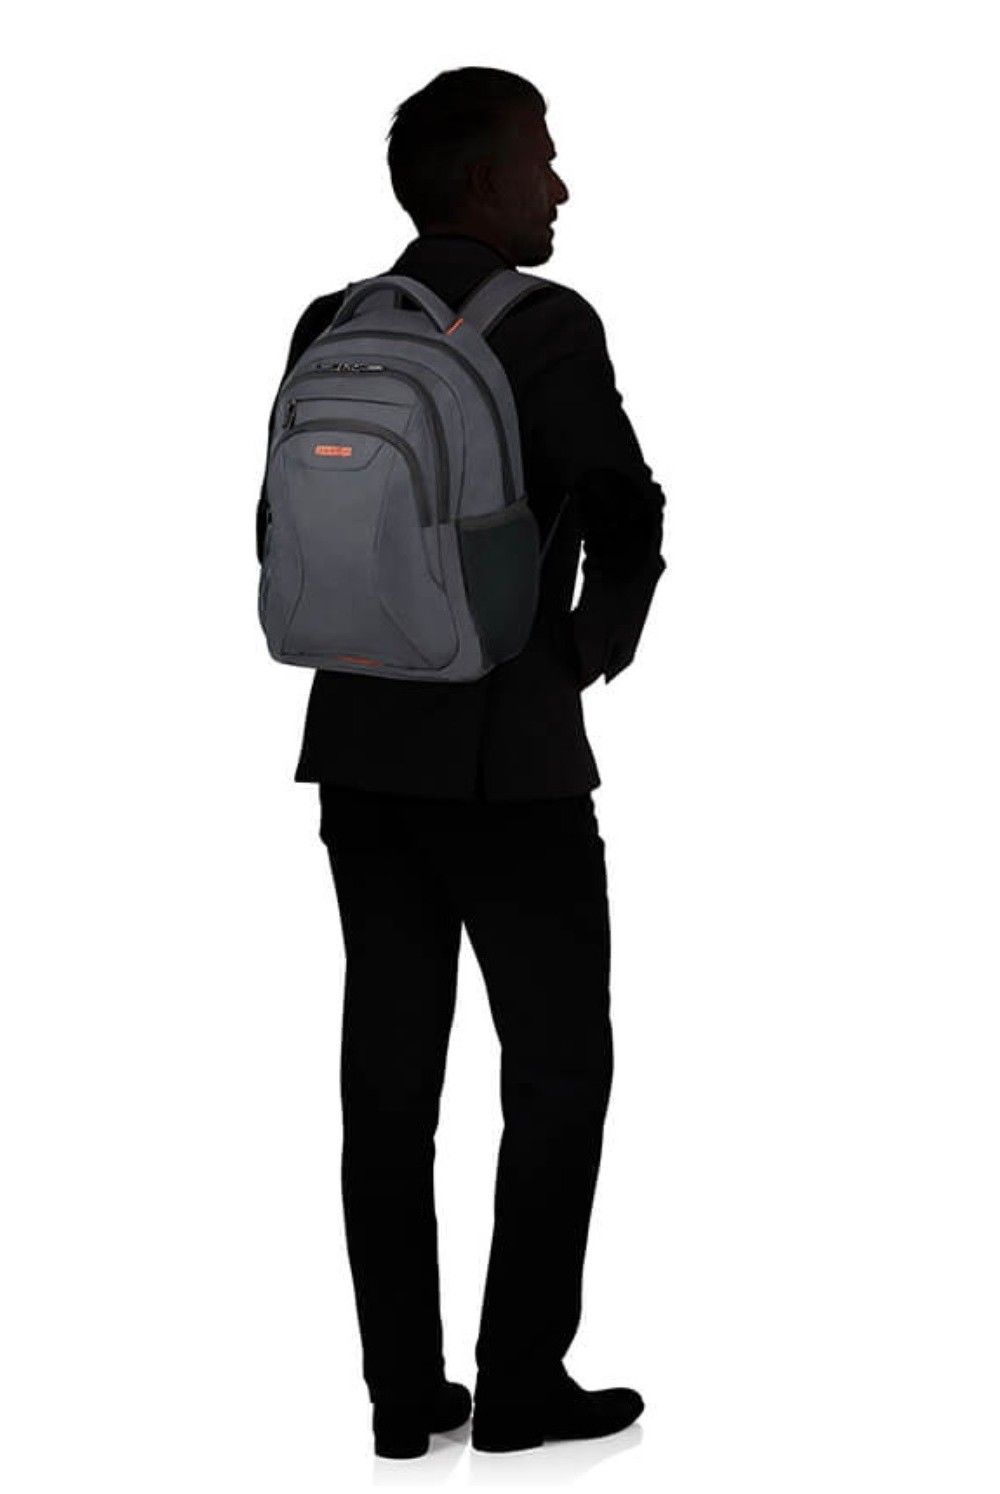 AT Laptop Backpack Work 15,6 pouces